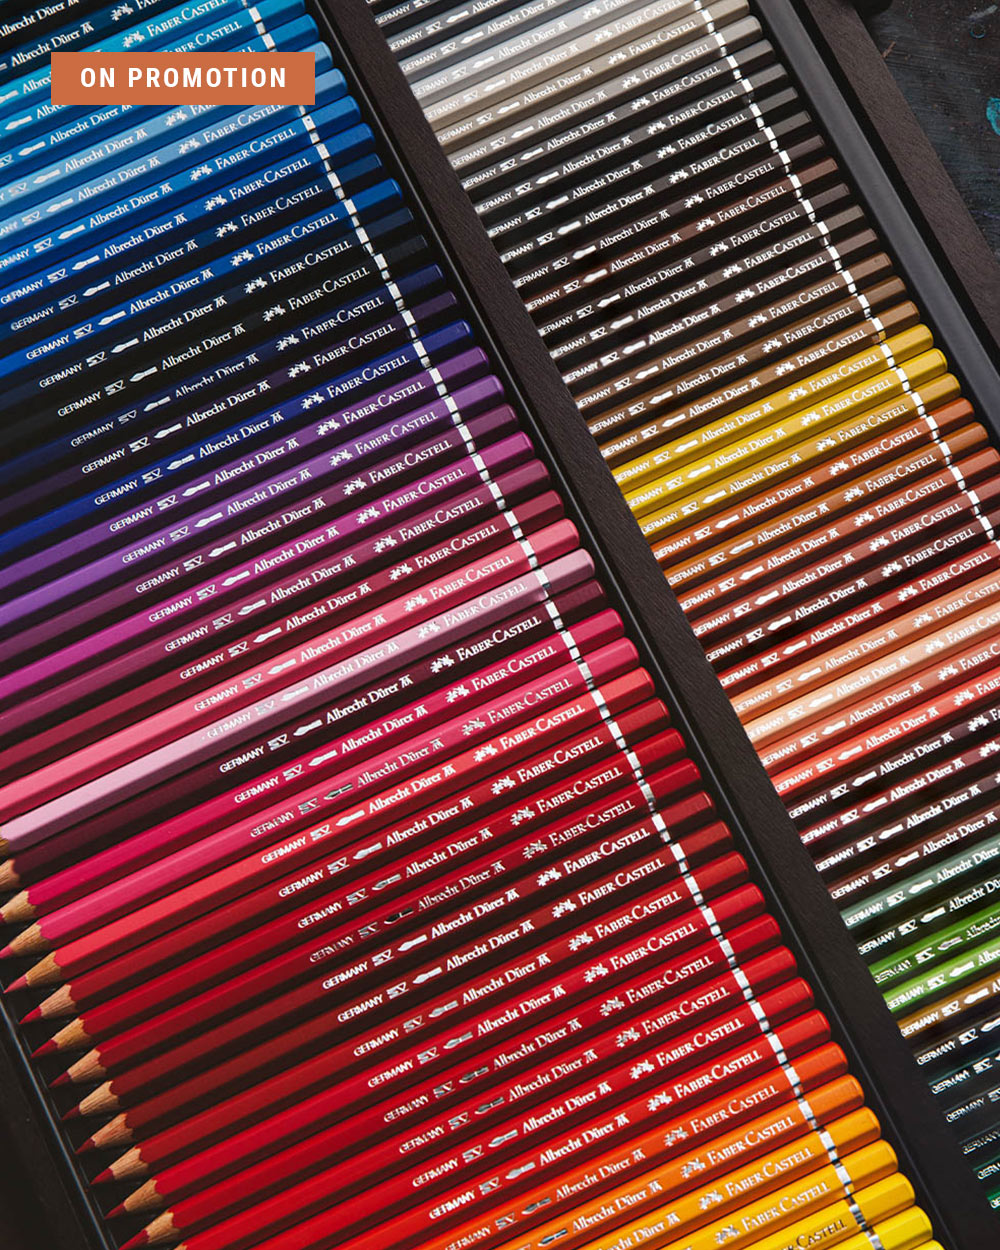 Watersoluble pencils are a versatile drawing medium allowing for a wide range of mark making. As well as crisp or broad lines, there's potential for washes and staining.